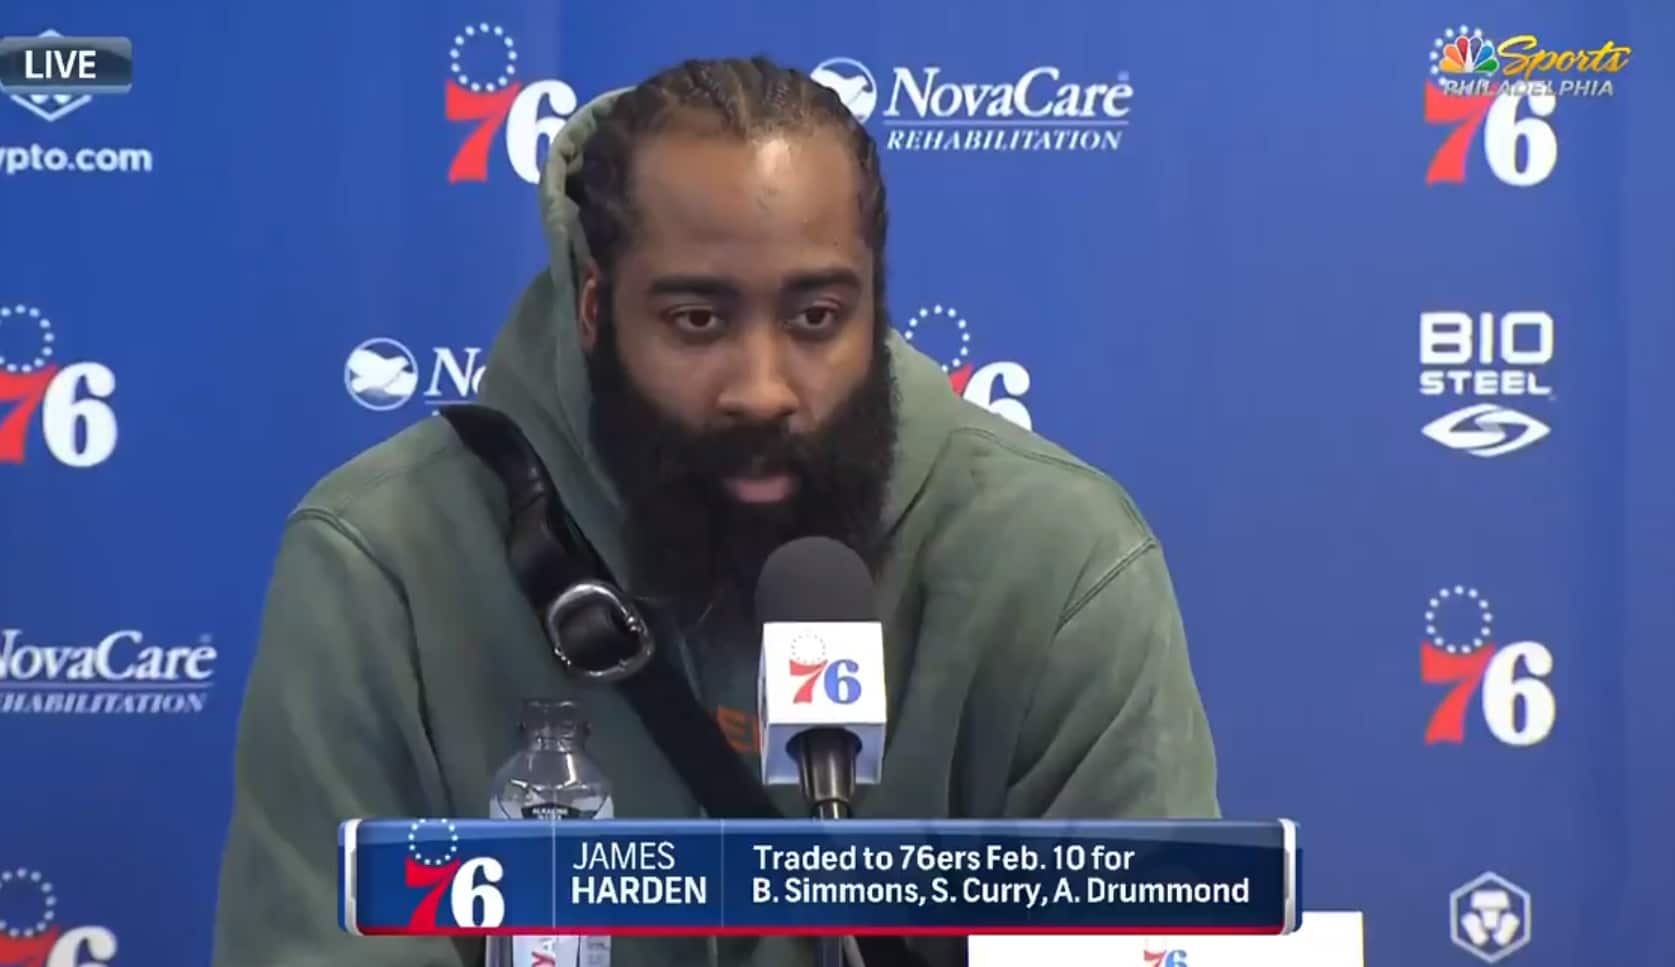 “Philly Was My First Choice” – James Harden at Introductory Press Conference